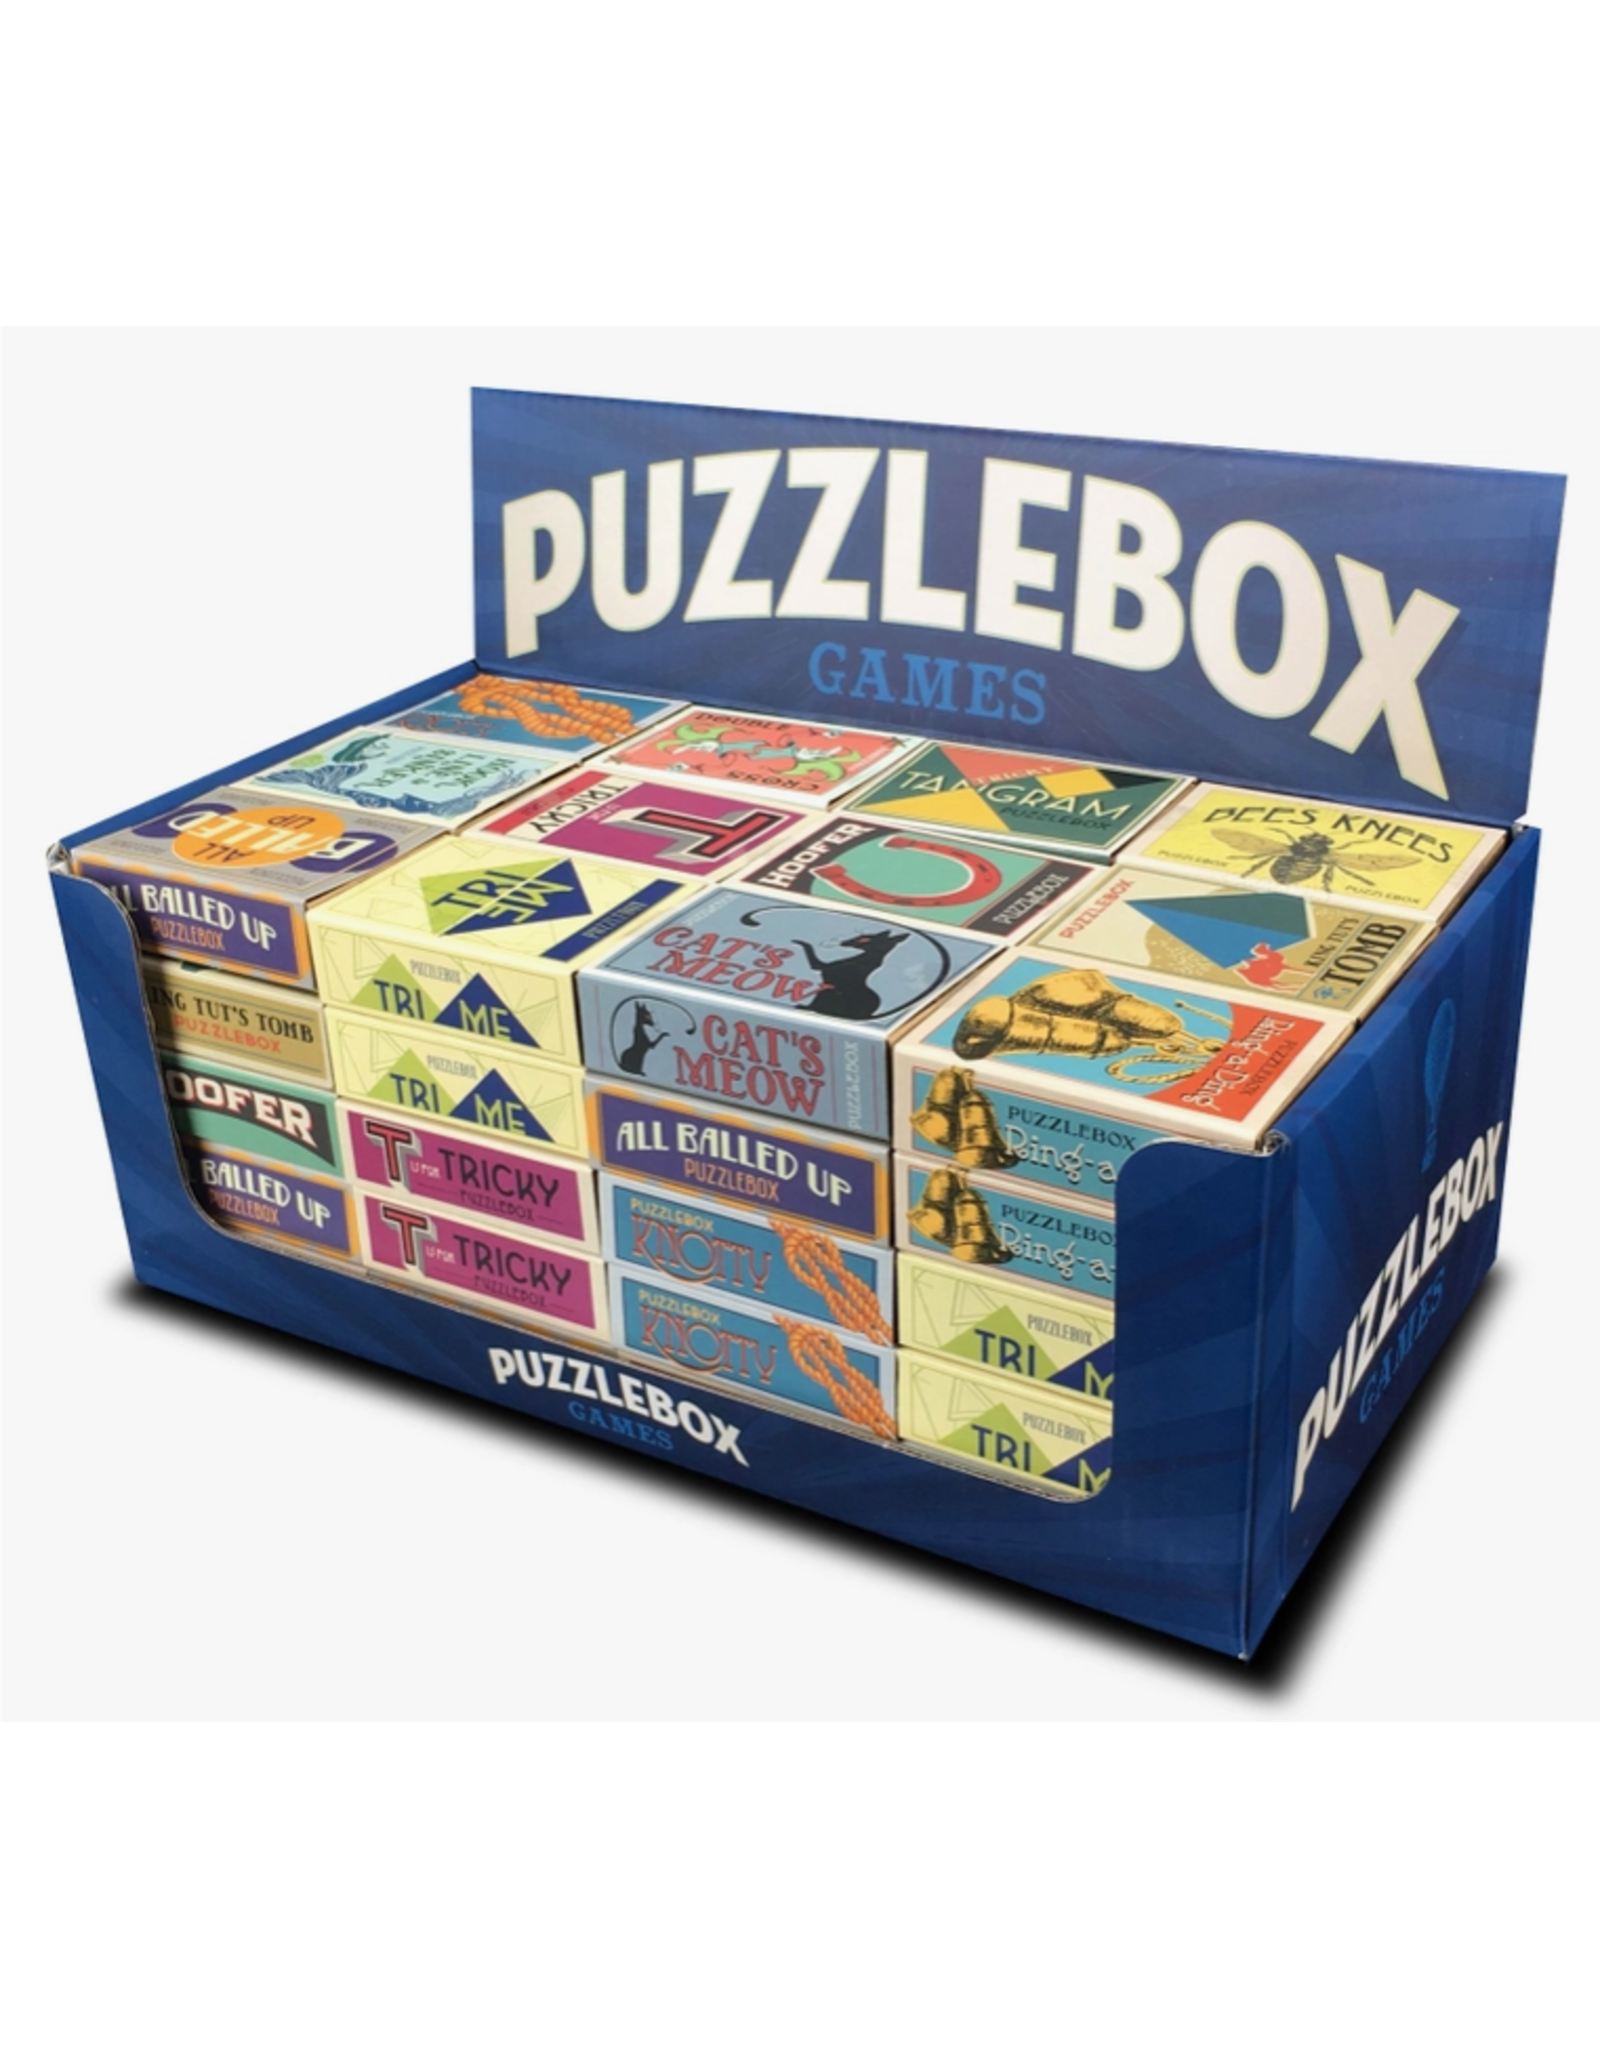 Project Genius Puzzlebox Games (Assorted)